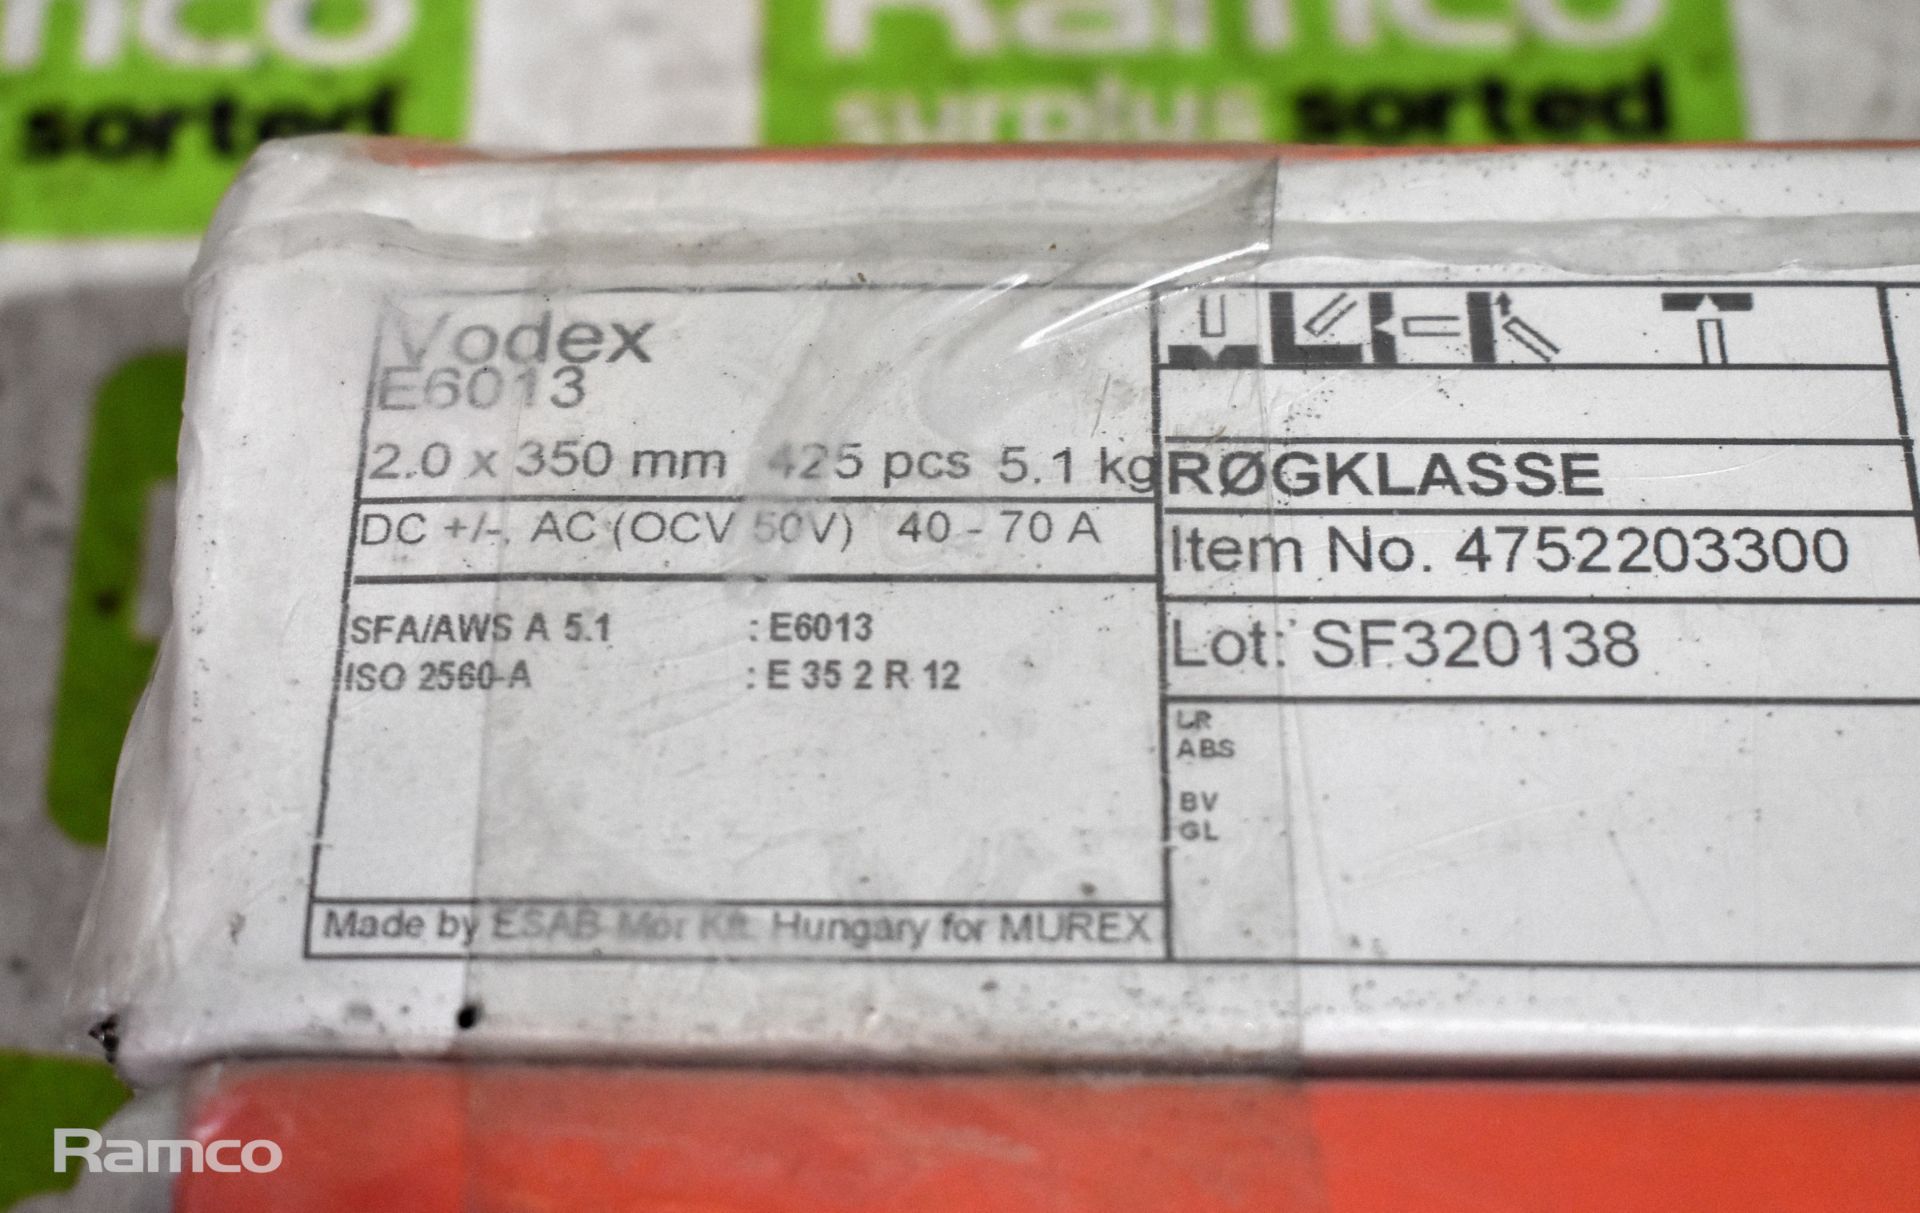 2x packs of Murex Vodex E6013 2.0 x 350mm welding electrodes - approx 400 per box - Image 2 of 3